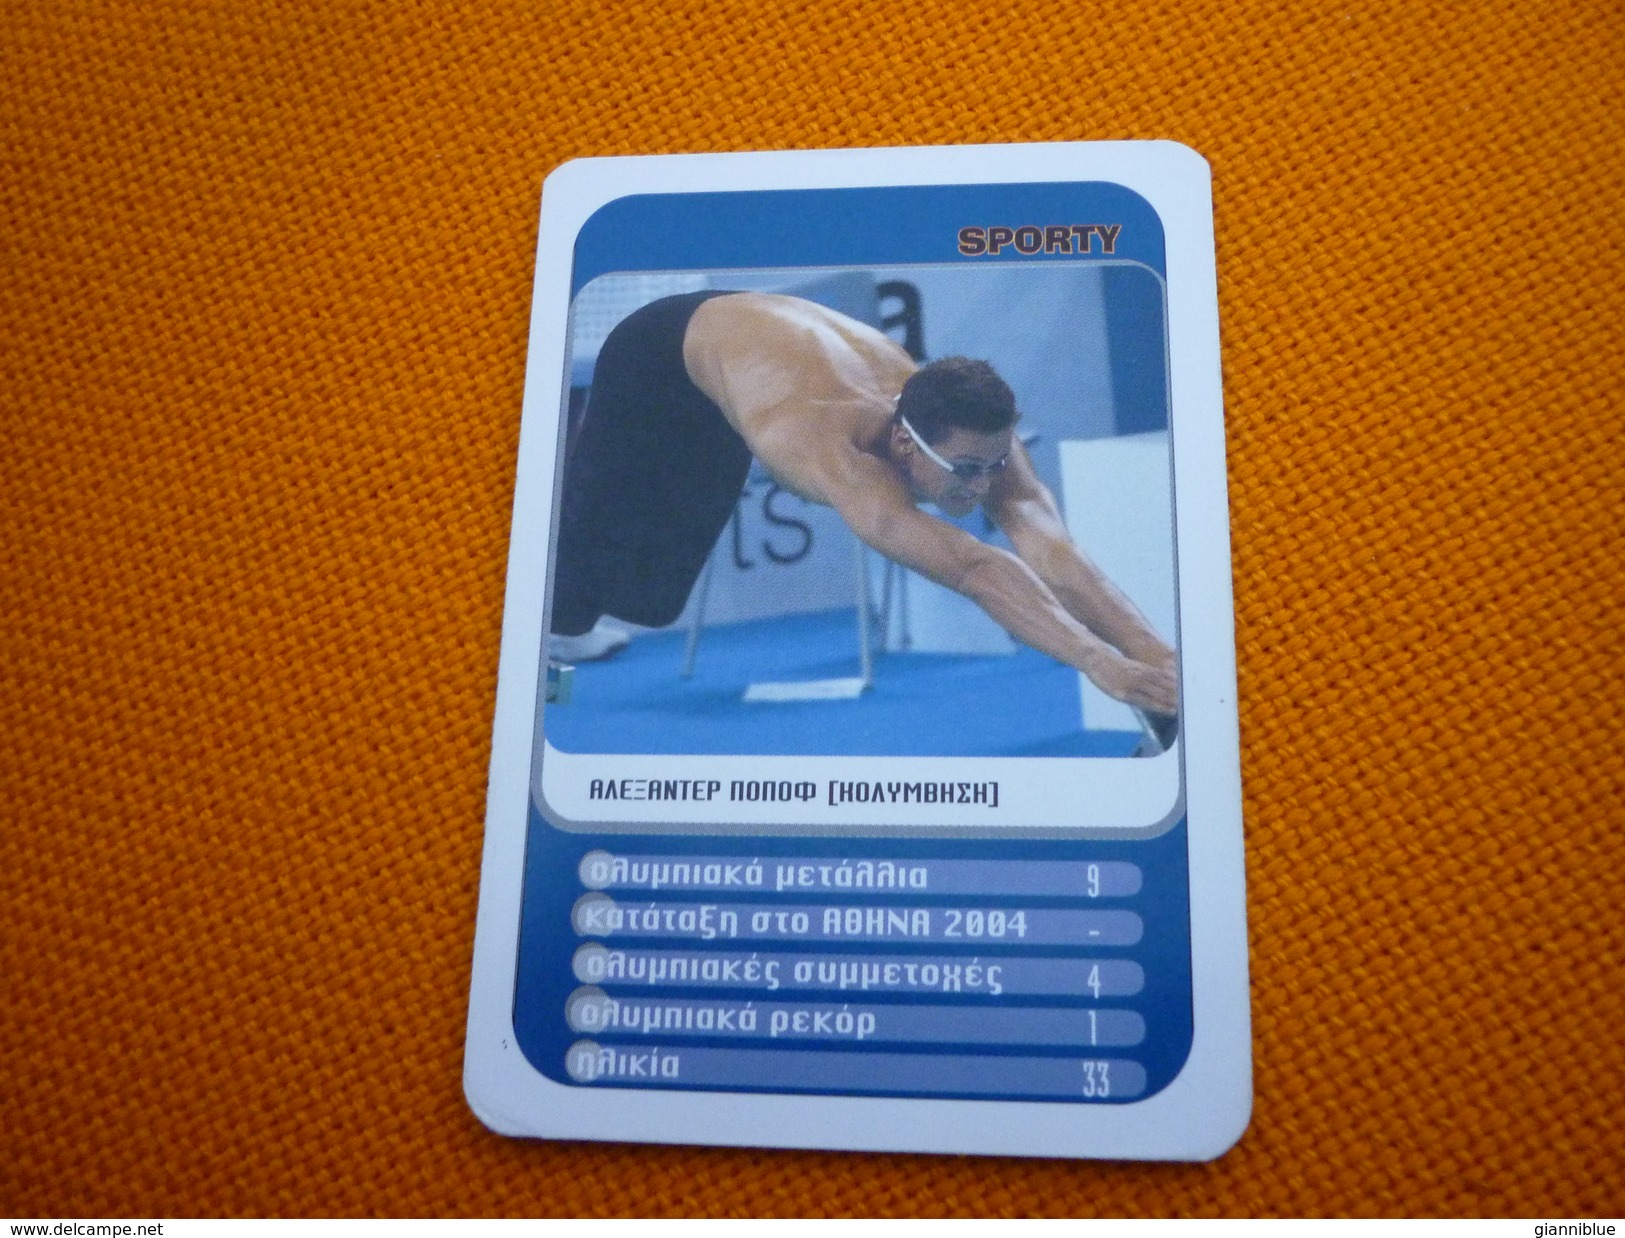 Alexander Popov Russian Swimmer Swimming Athens 2004 Olympic Games Greece Greek Trading Card - Trading Cards